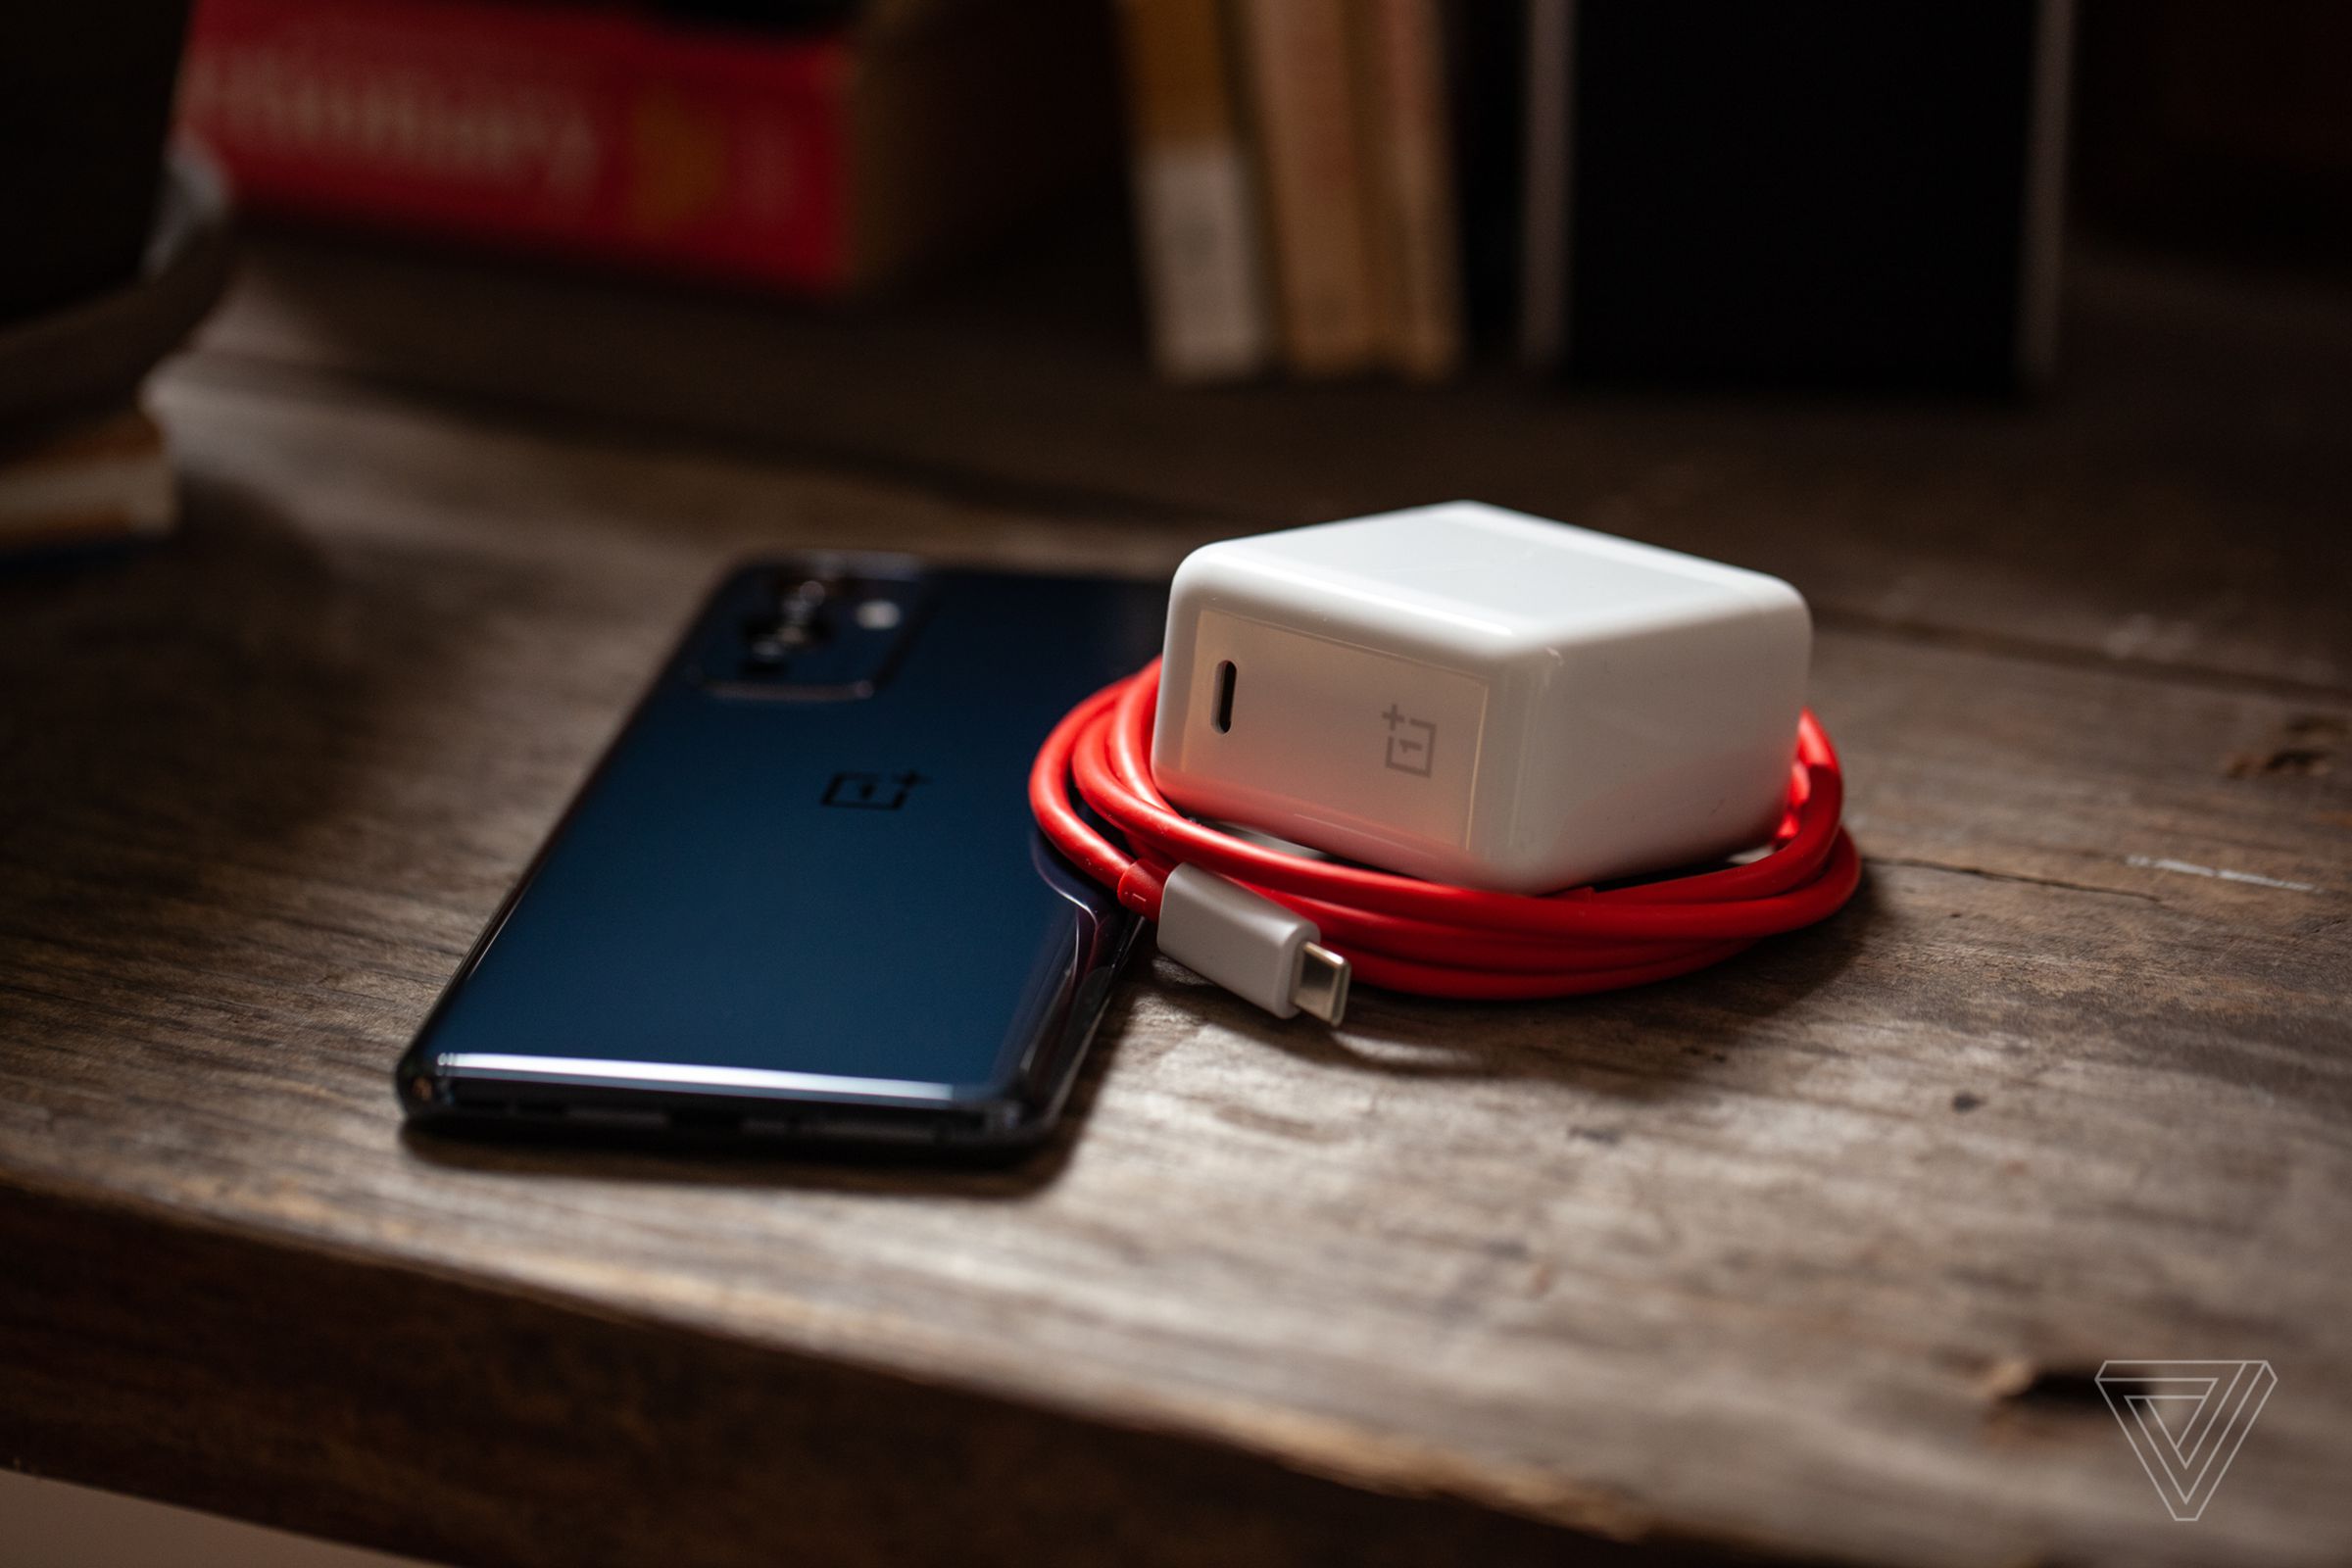 The OnePlus 9’s included fast charger is one of its unique features.